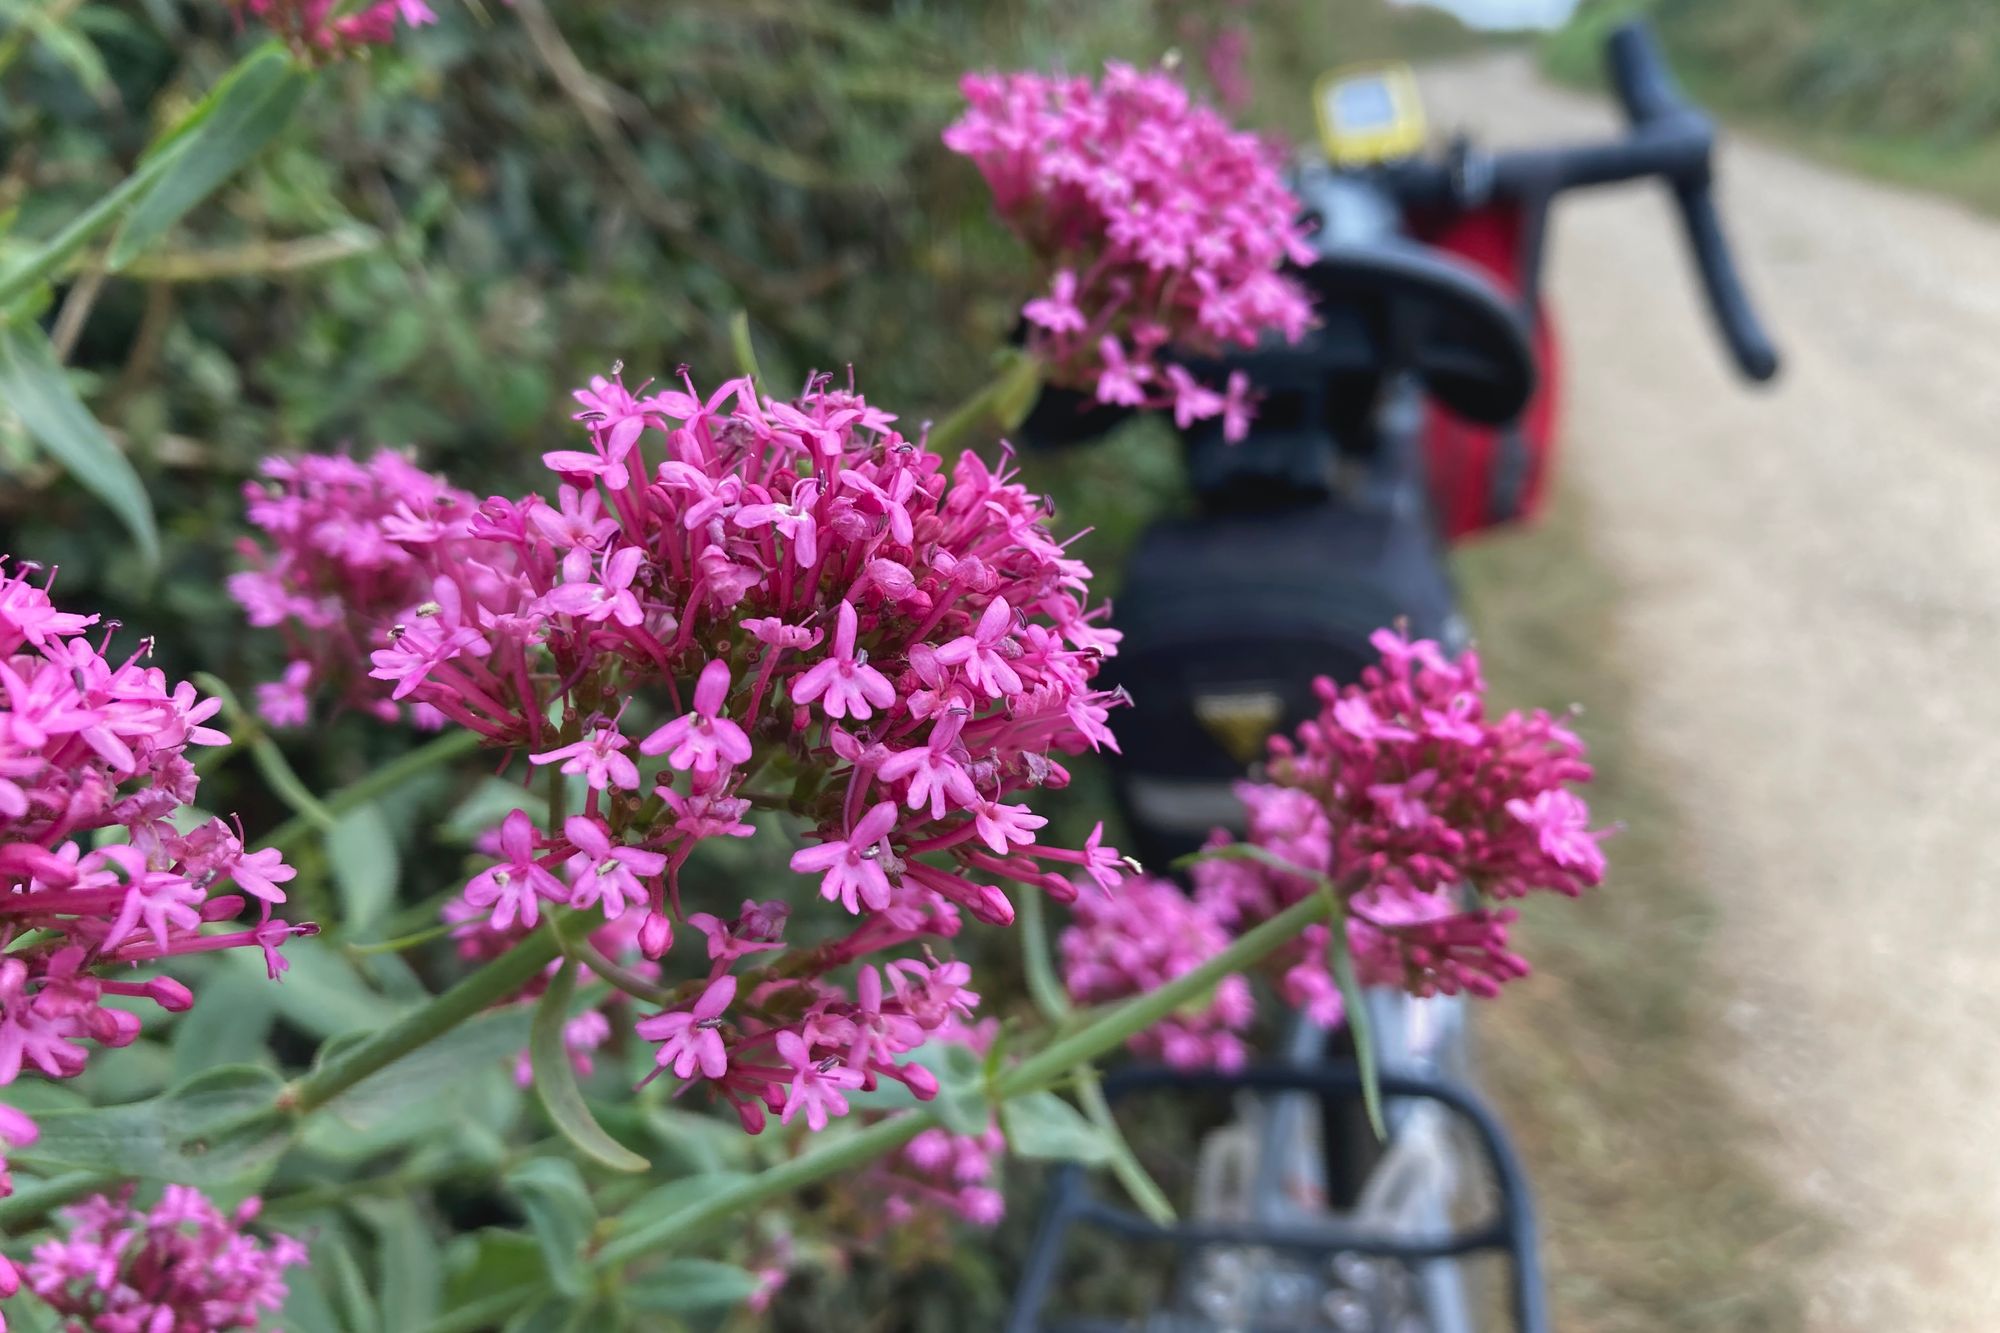 A bike is parked on the edge of a track, behind pink flowers.